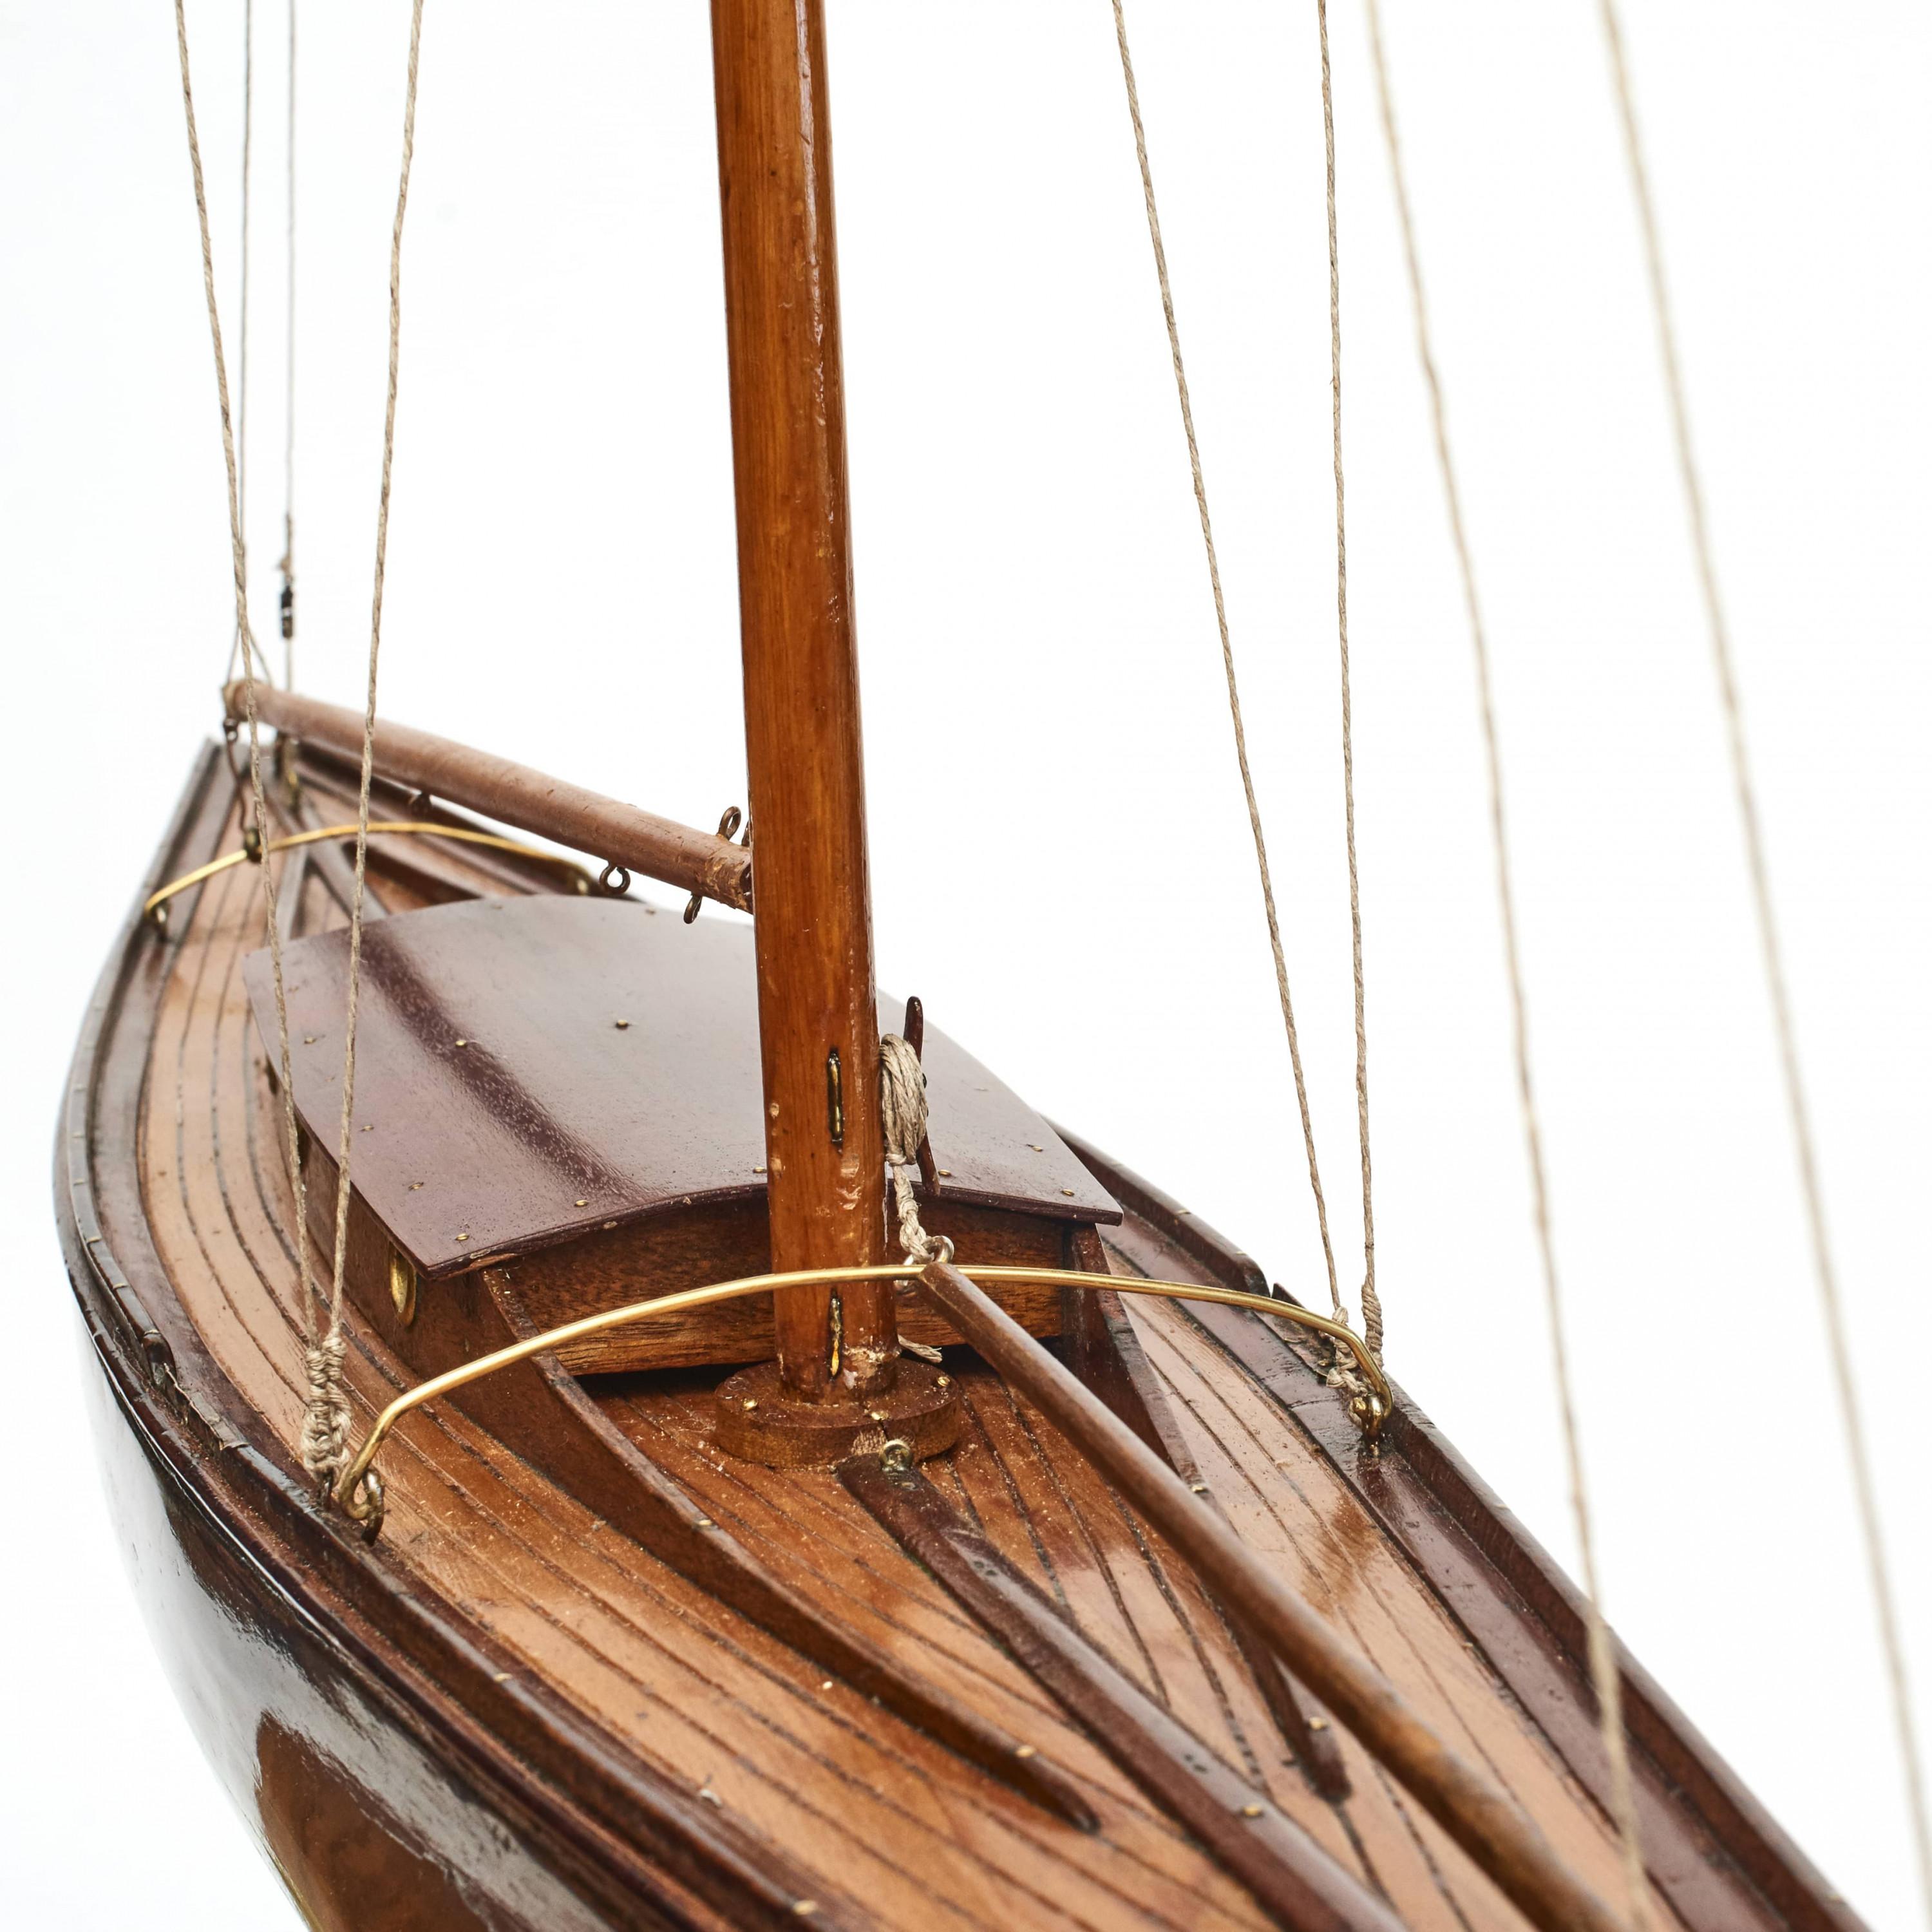 Elegant wooden pond yacht/ship model in mahogany. Keel in lead.
Ship hull painted green.
High quality, hand-built.
On original mahogany stand.

England ca. 1930.